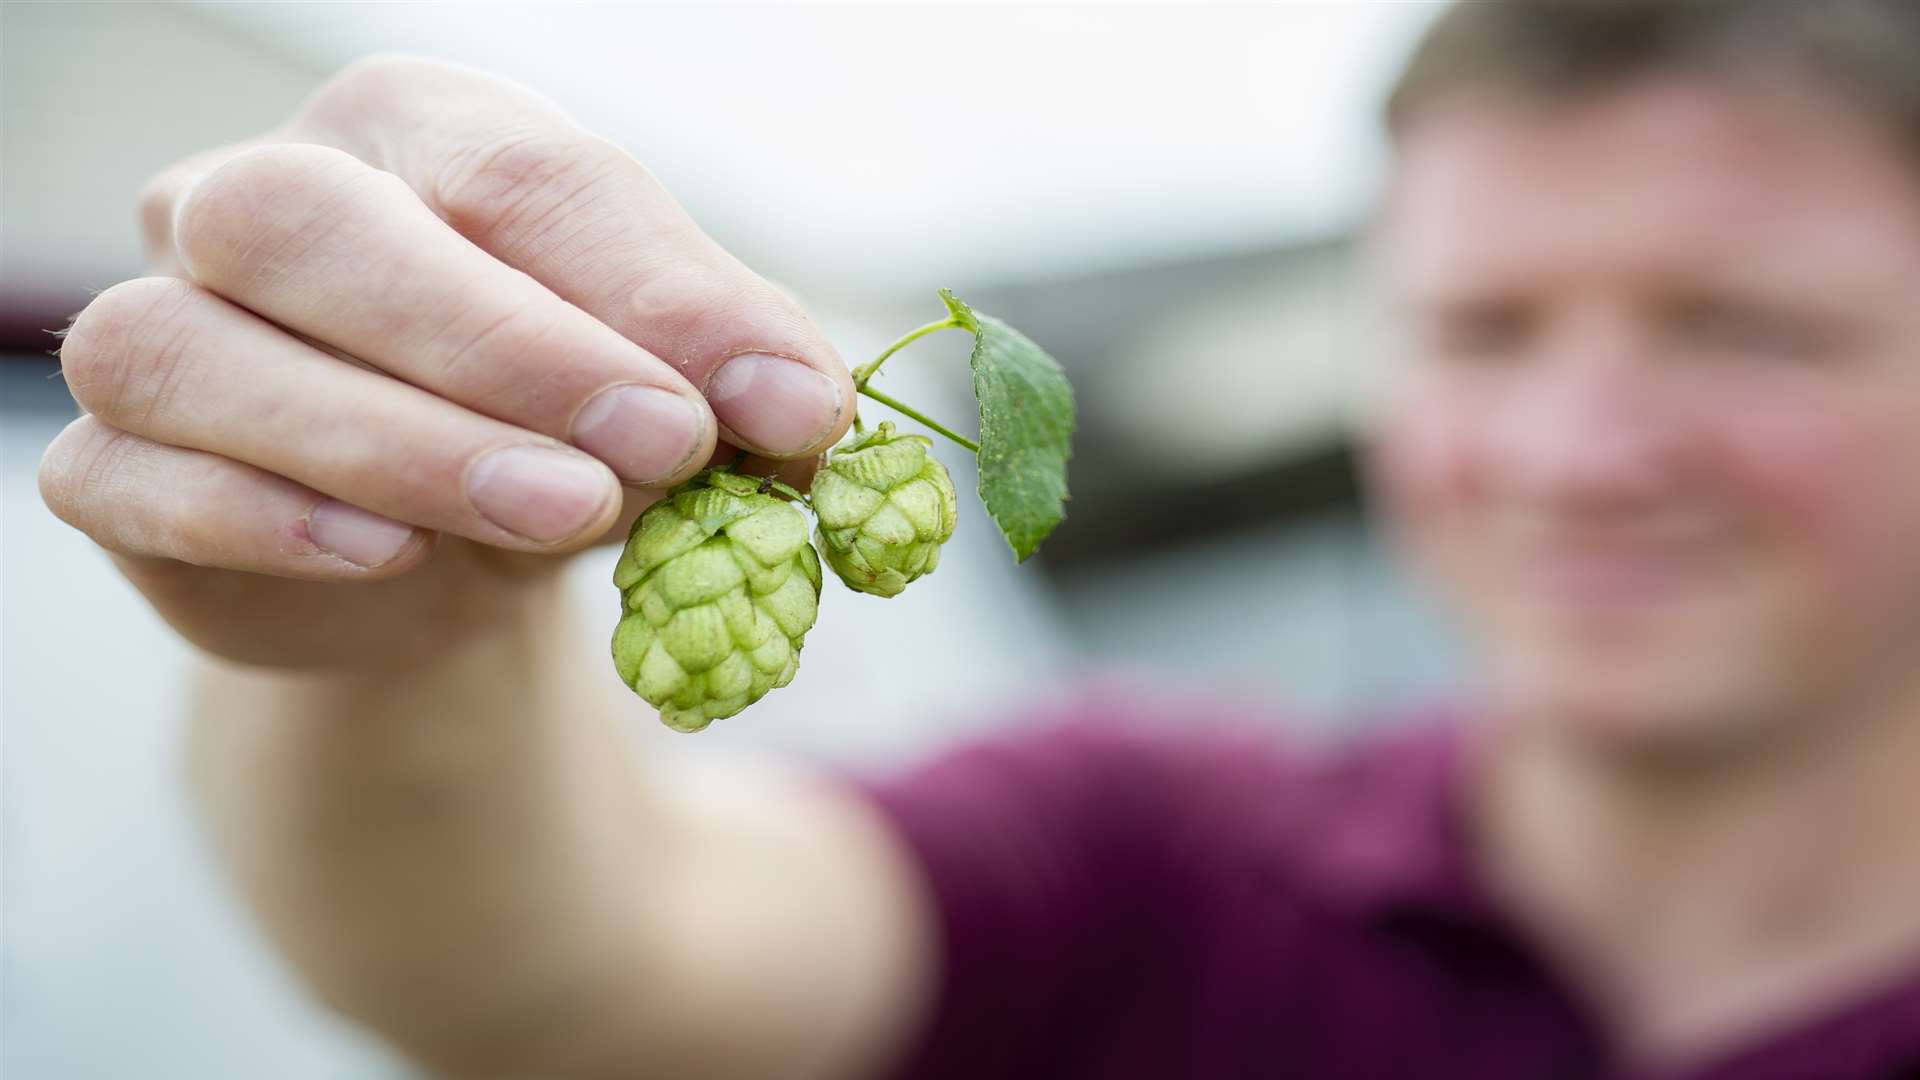 Hops have to be harvested and brewed within 12 hours for green hop beer